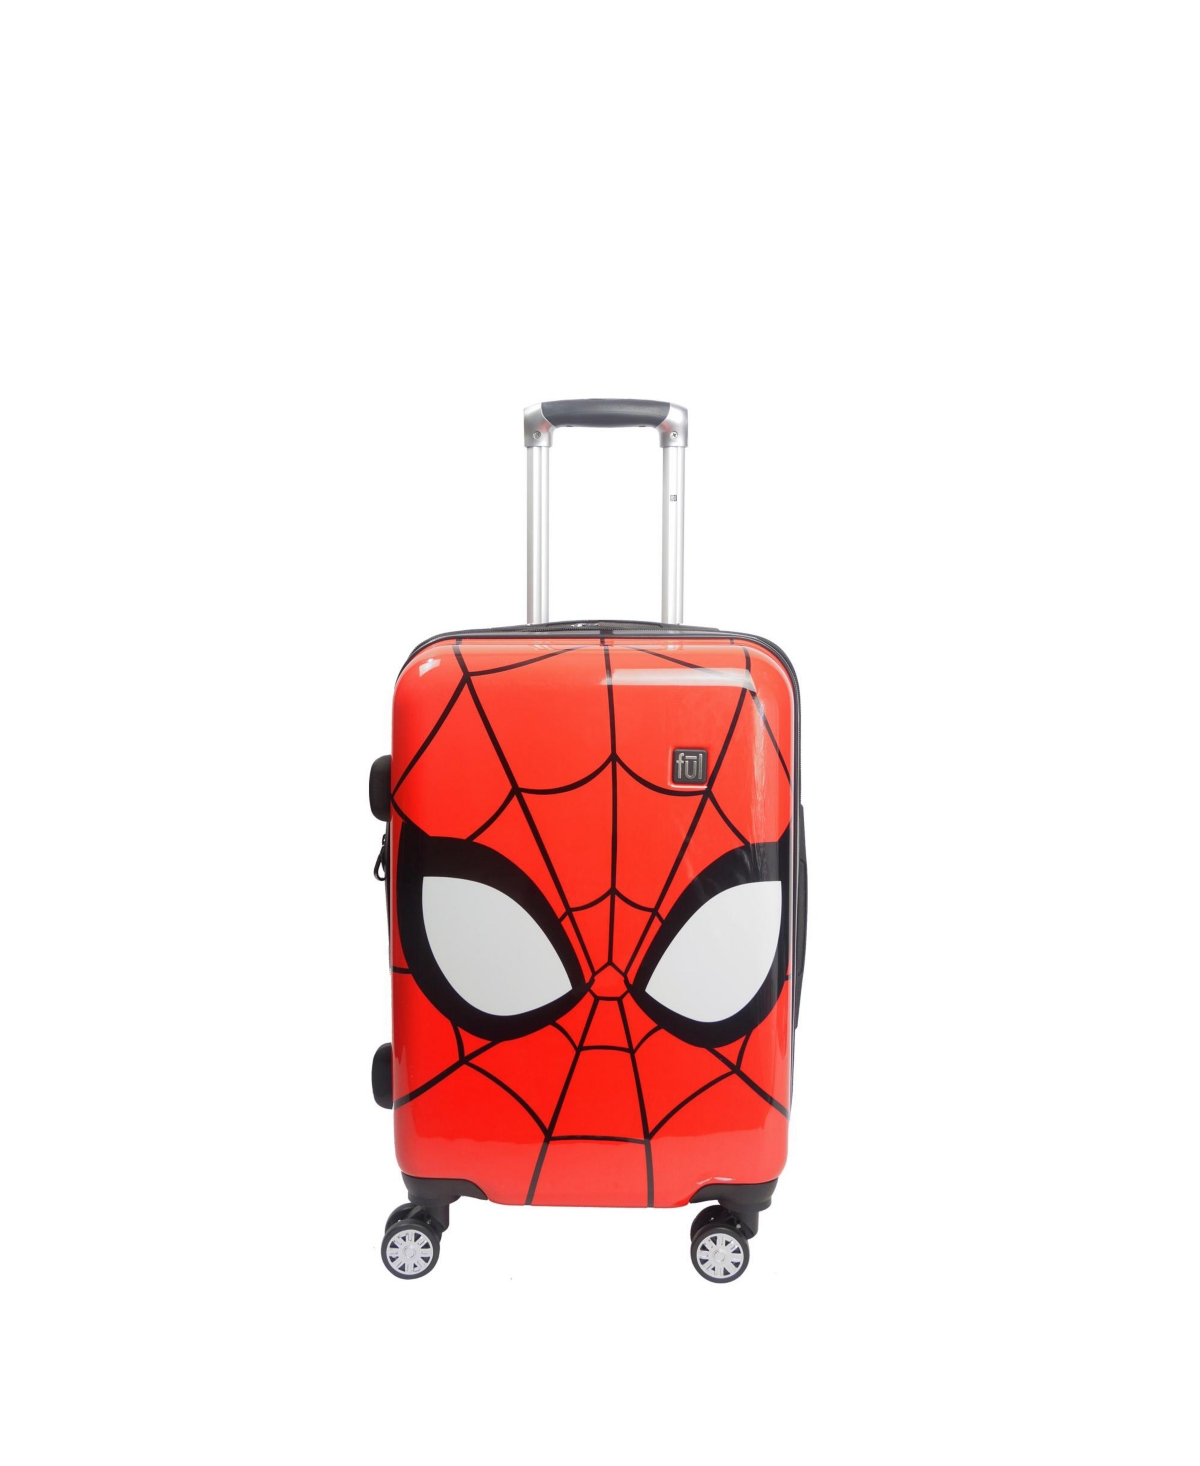 Ful Marvel Spiderman 21" Hard Sided Check In Luggage In Red